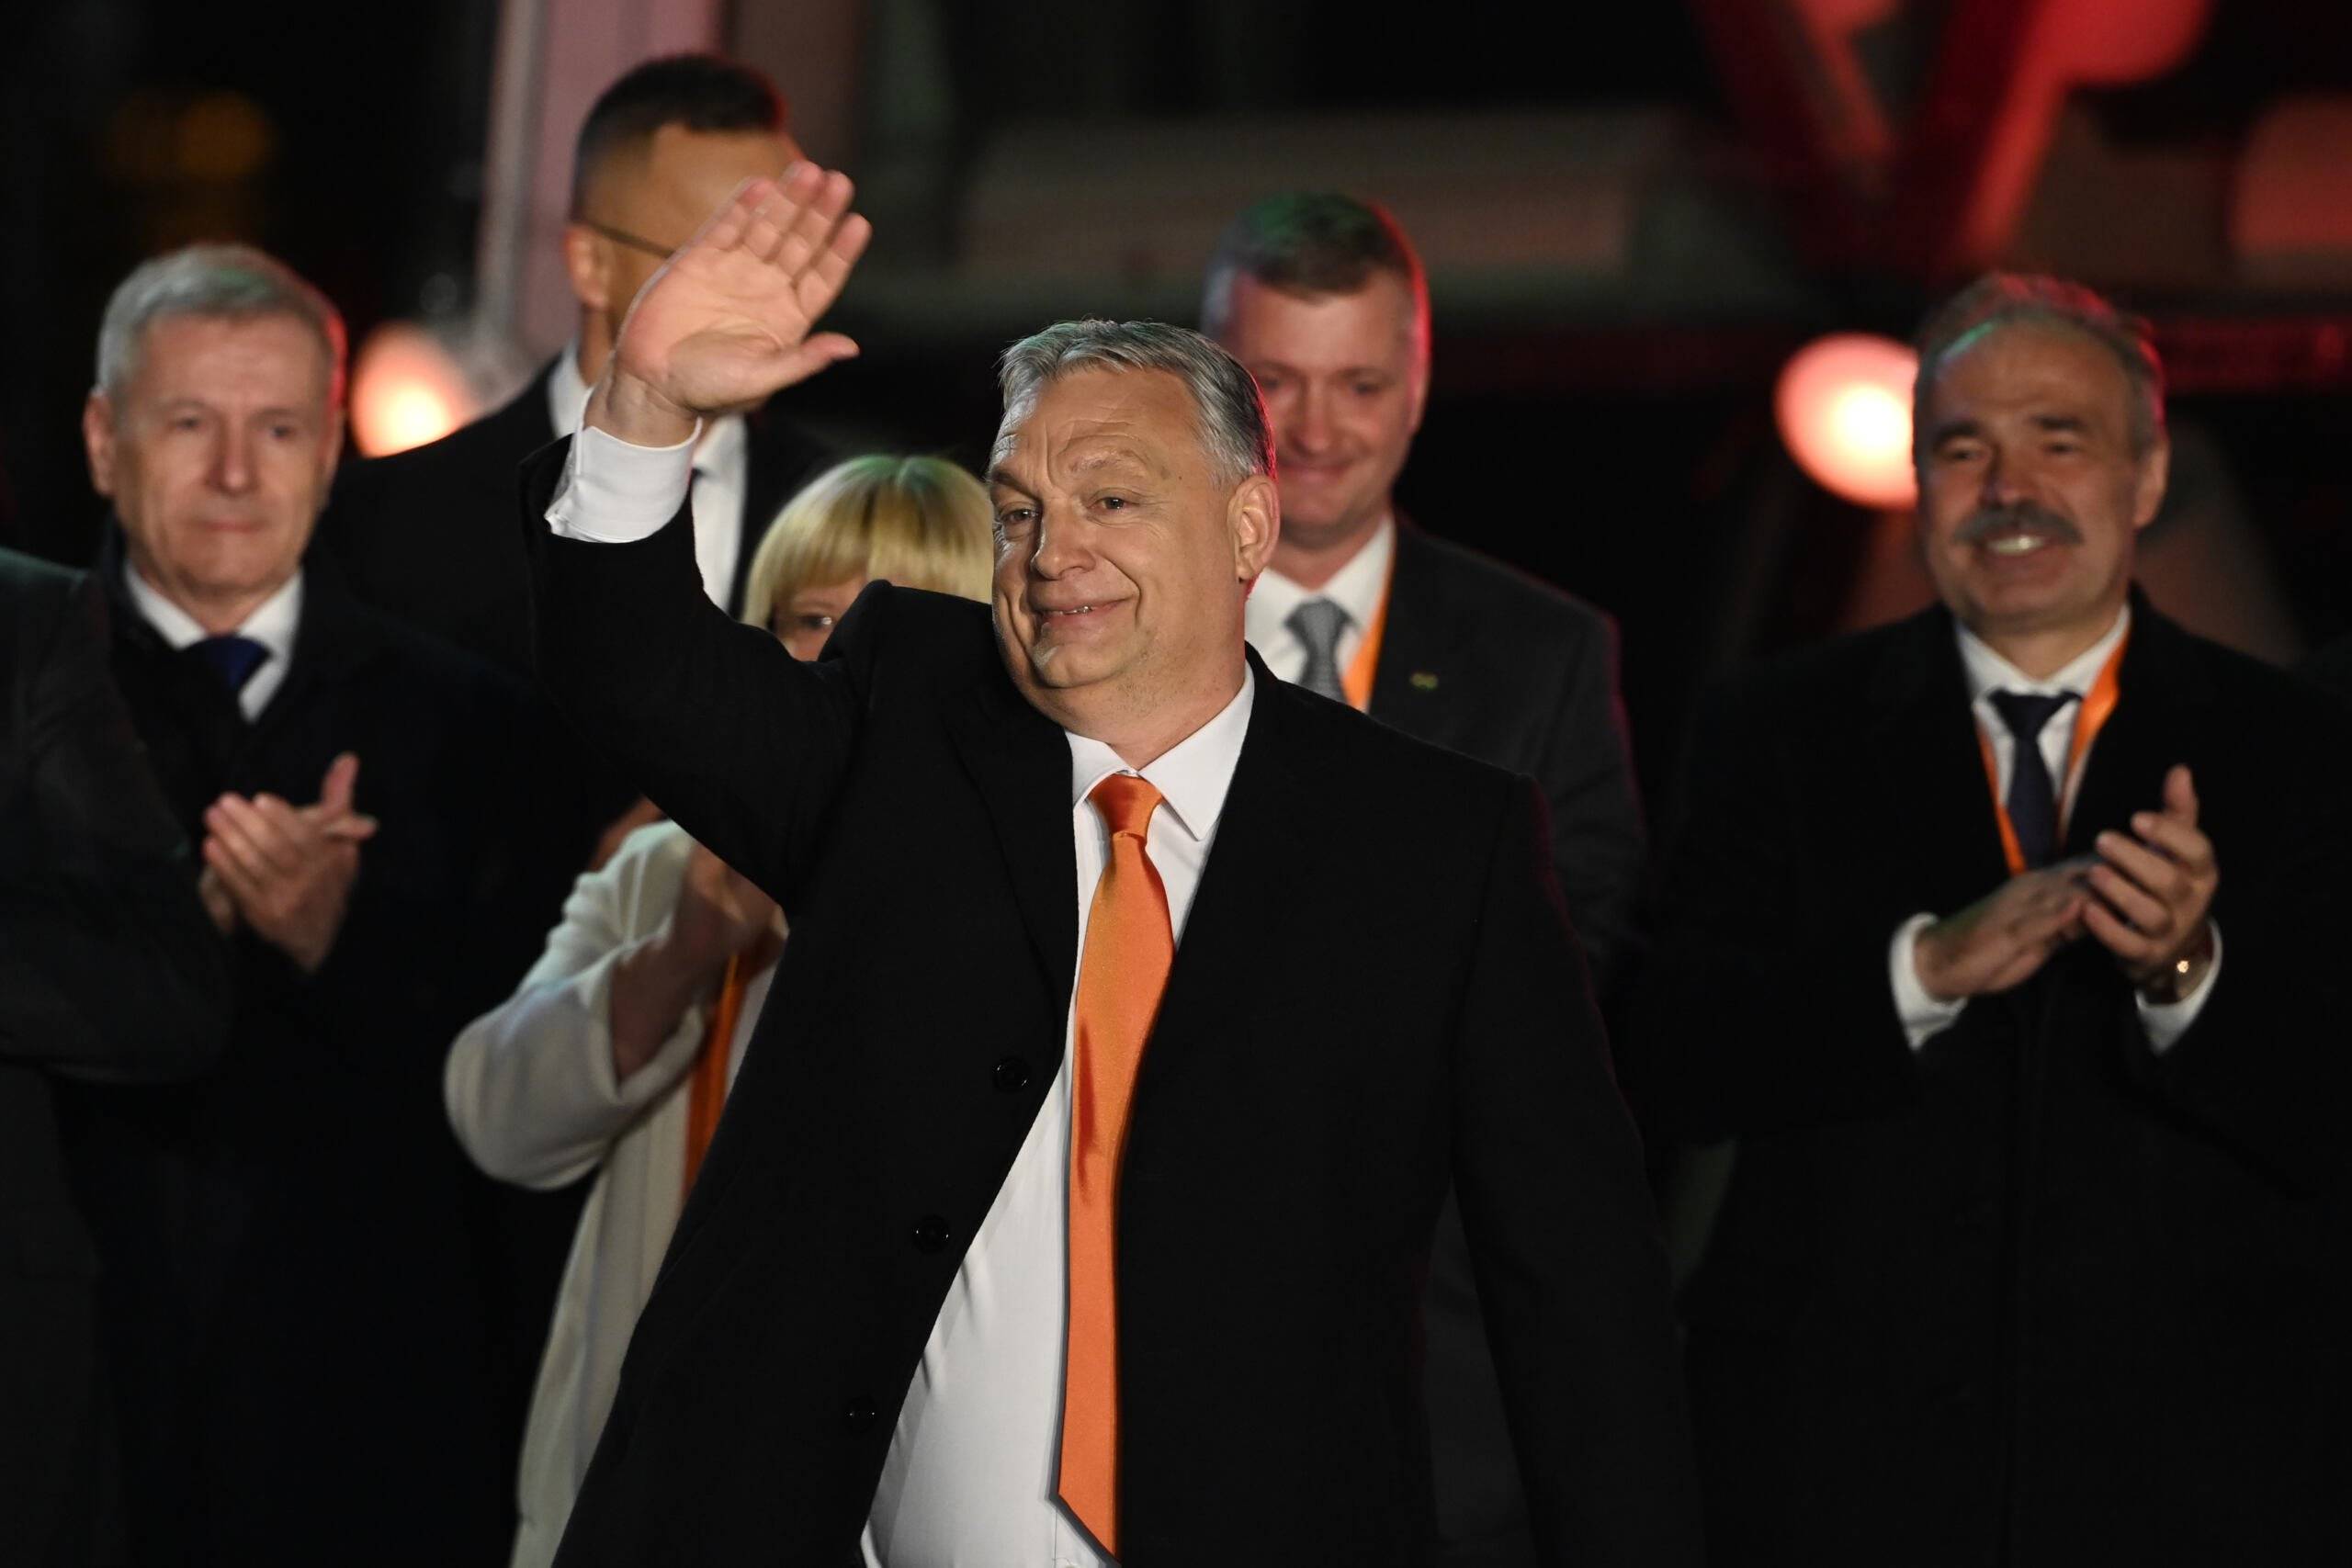 Hungarian Prime Minister Viktor Orban and members of the Fidesz party celebrate on stage at their election base, 'Balna' building on the bank of the Danube River of Budapest, on April 3, 2022. - Nationalist Hungarian Prime Minister Viktor Orban claimed a "great victory" in general election, as partial results gave his Fidesz party the lead. (Photo by Attila KISBENEDEK / AFP)